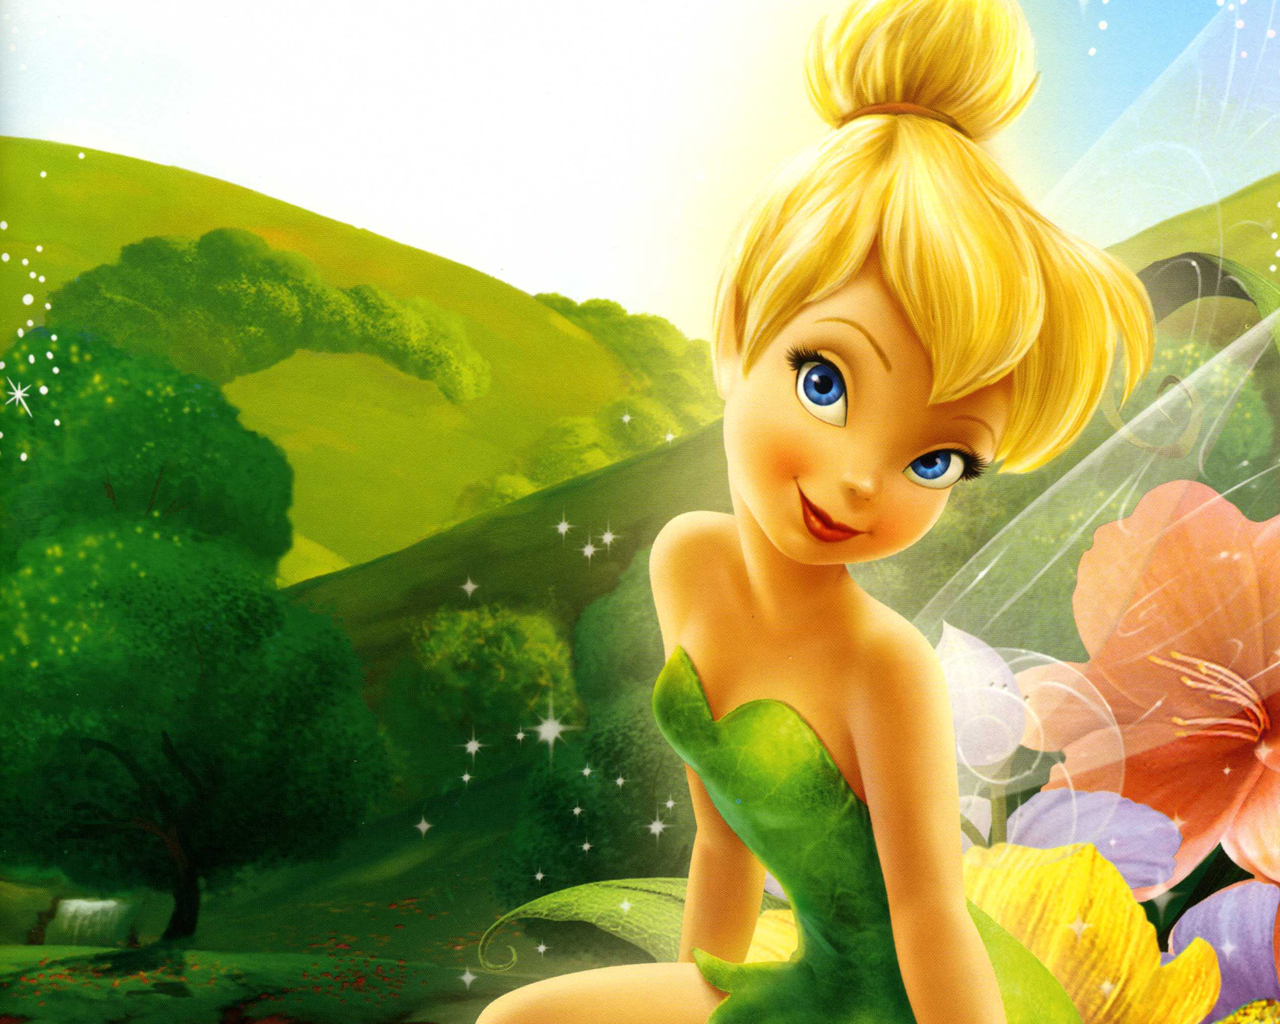 [49+] Tinker Bell Wallpapers and Screensaver on